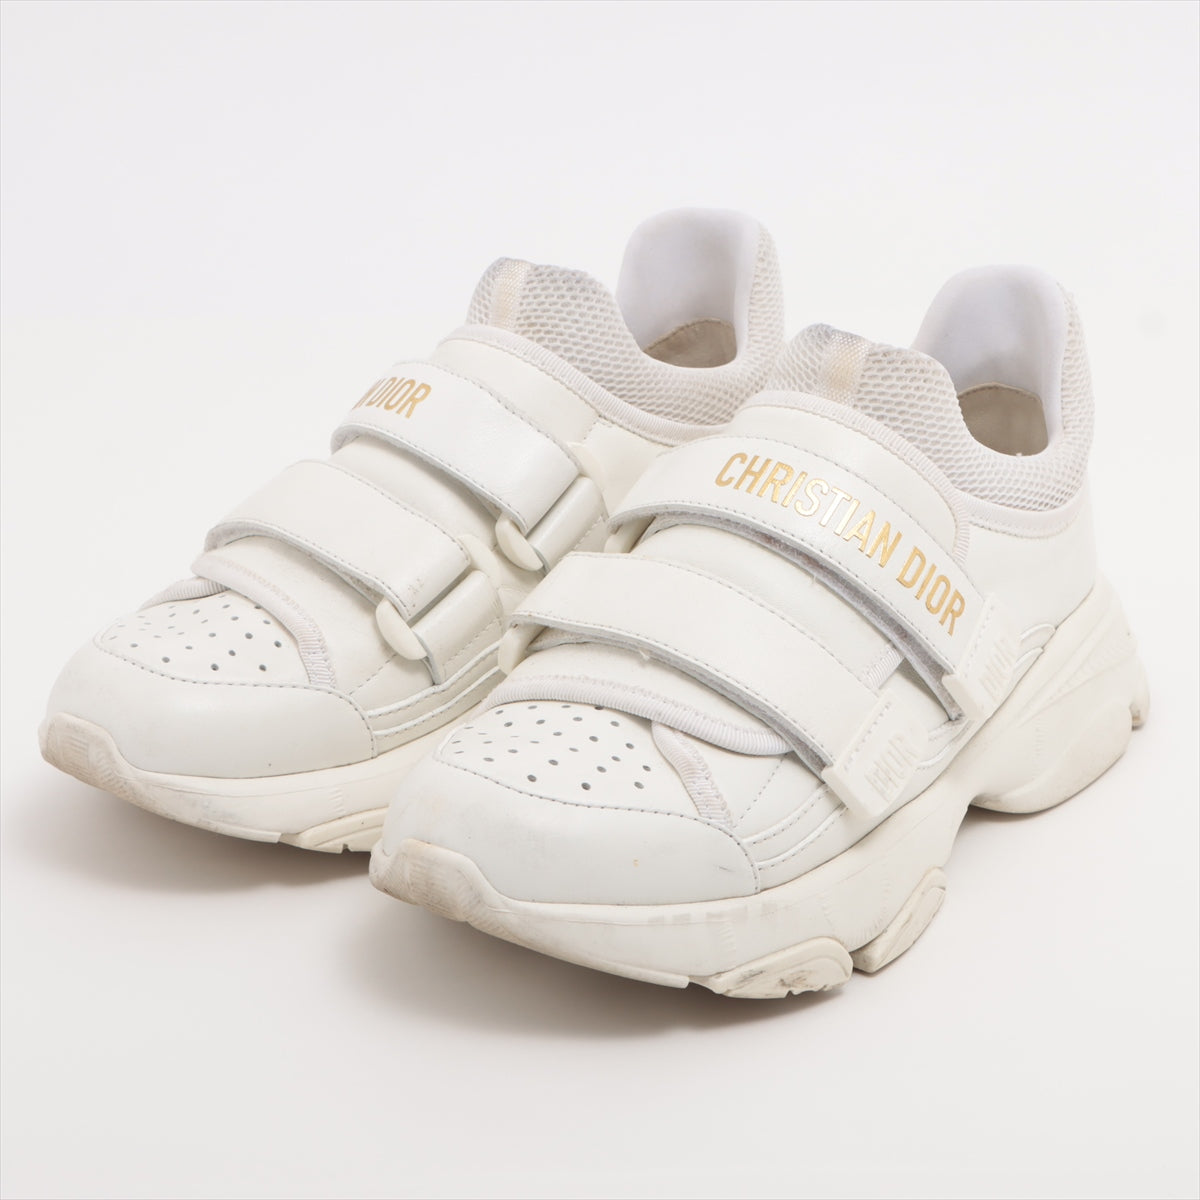 Christian Dior Leather Sneakers 36 1/2 Ladies' White D-WANDER